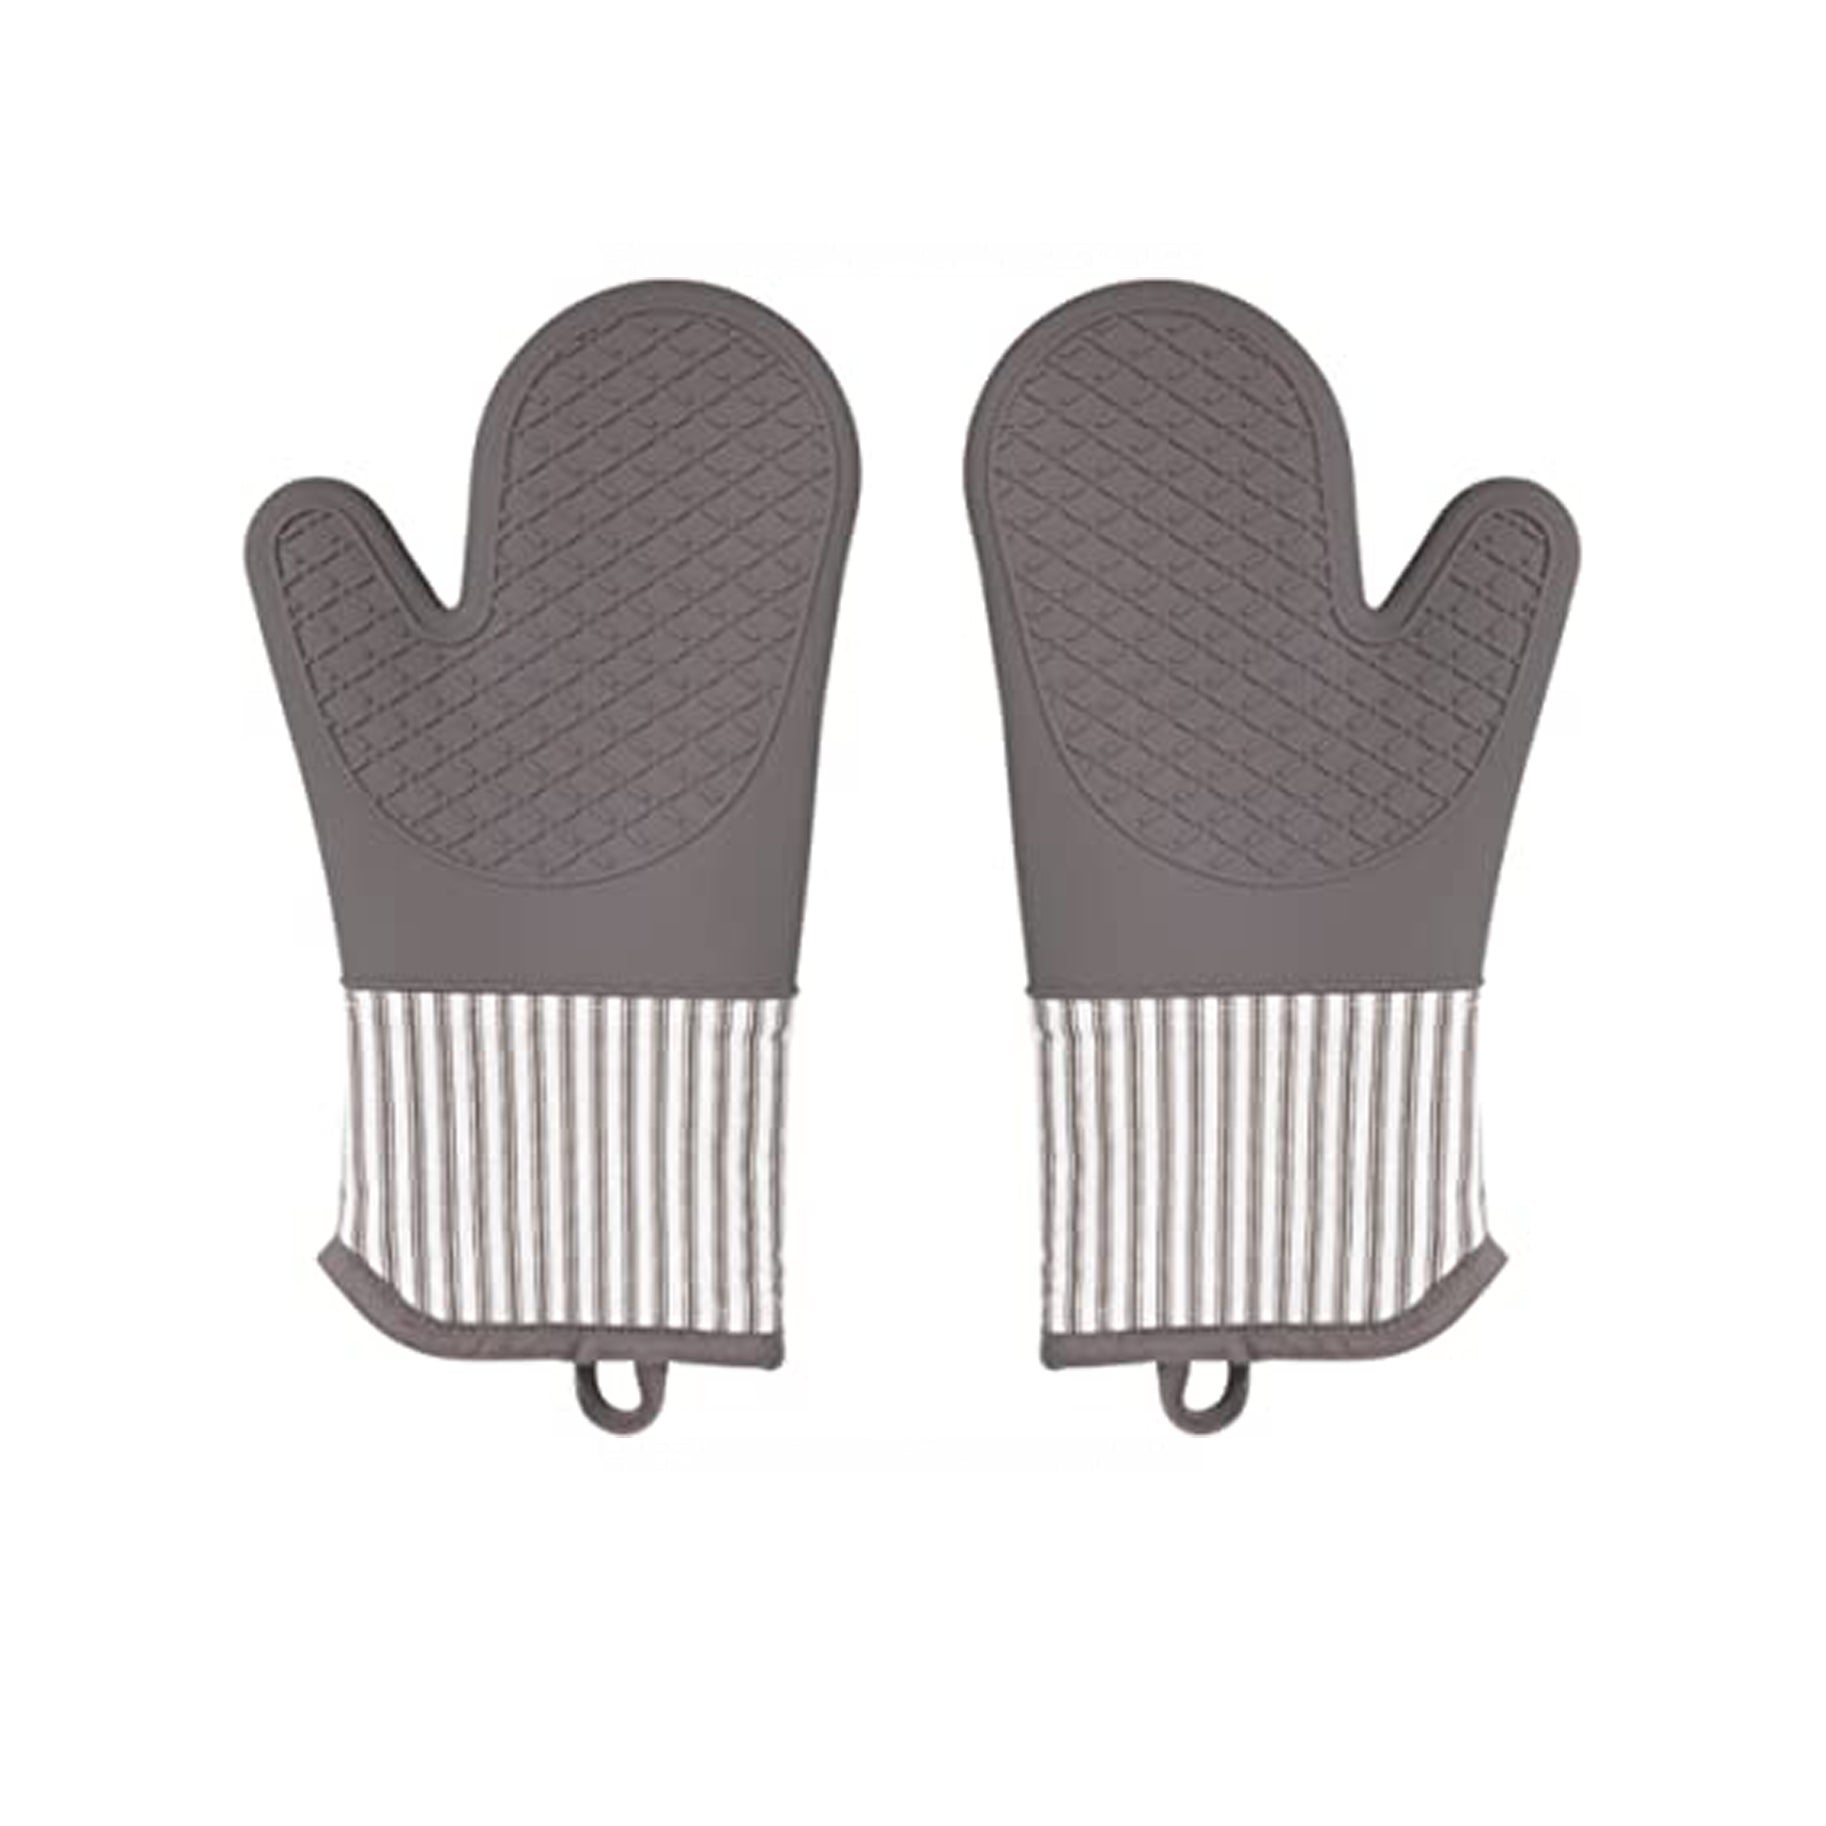 https://www.saveur.com/uploads/2021/08/18/The-Best-Oven-Mitts-Option-KAF-Home-Chefs-Oven-Mitts.jpg?auto=webp